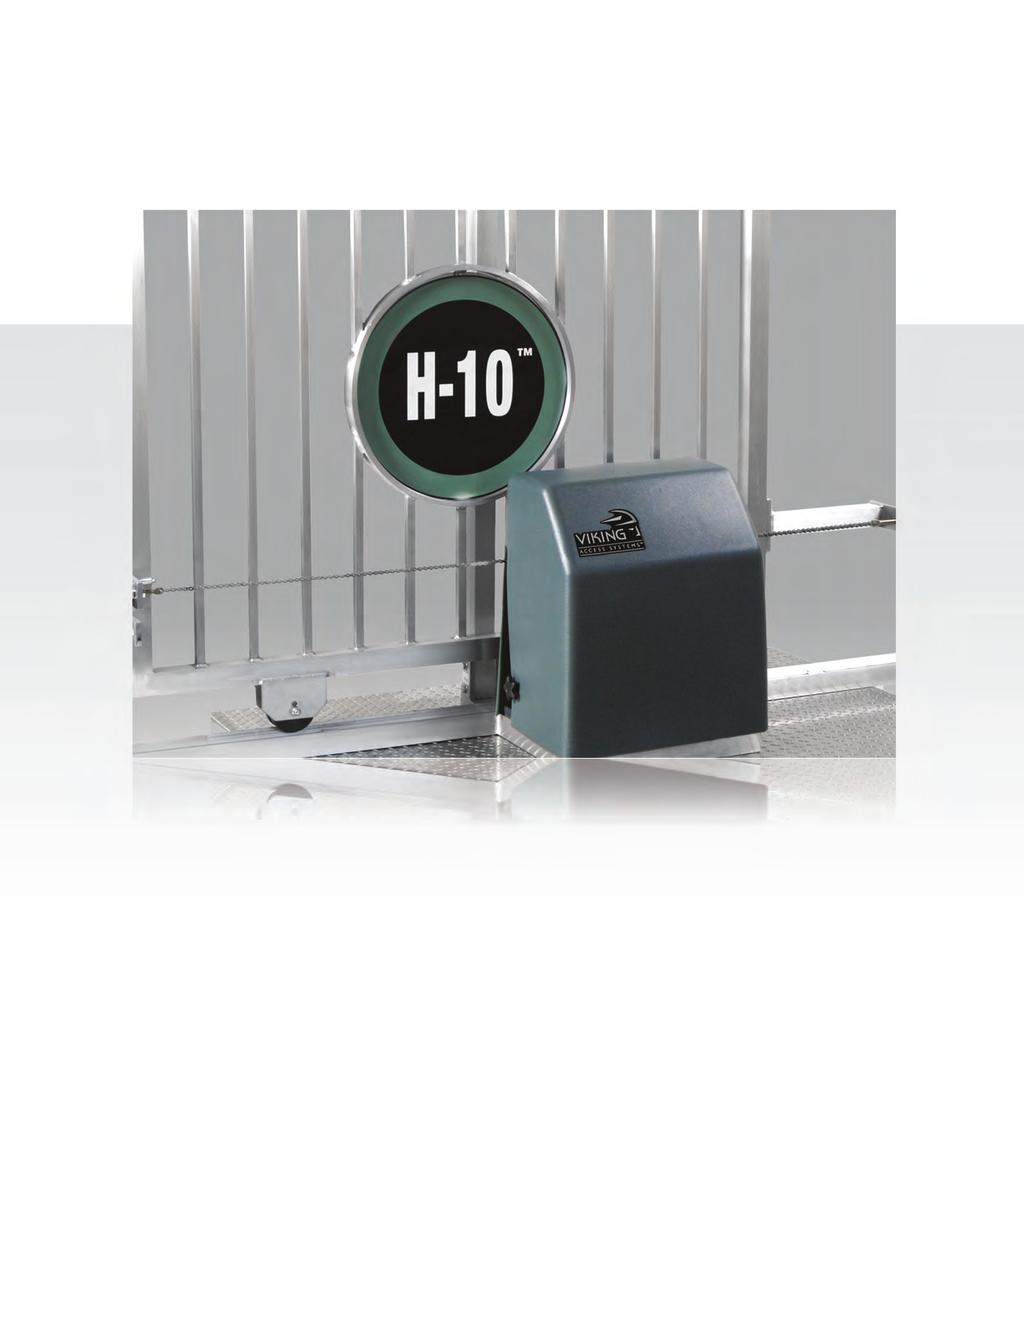 The H-10 gate operator has the capacity to operate slide gates up to 2000 lbs. and 45 feet in length at 100% duty cycle under extreme conditions.